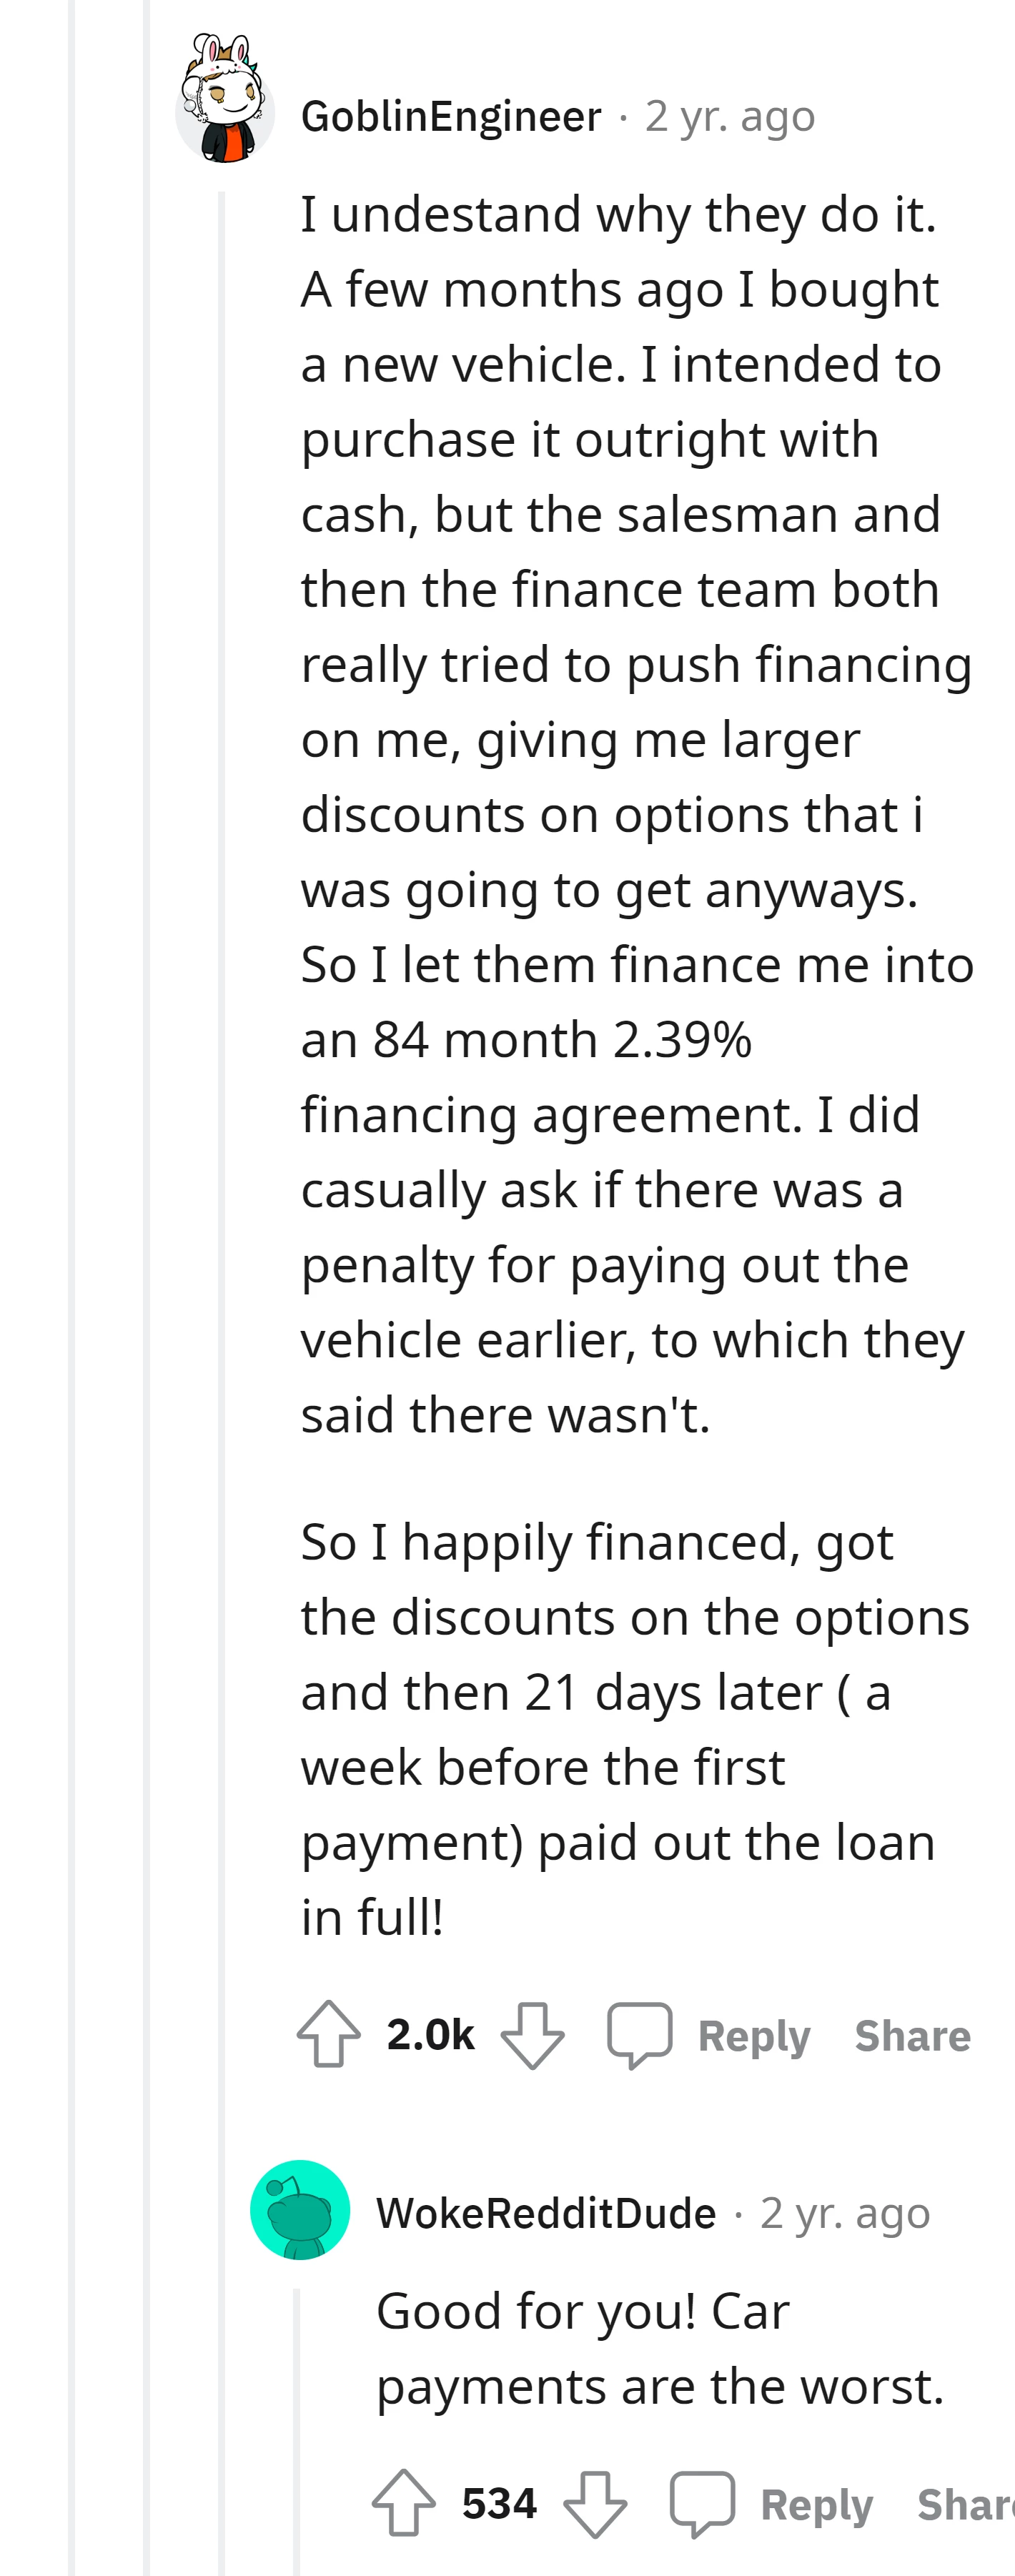 The commenter shares their experience of initially intending to buy a new vehicle outright but opting for financing due to attractive discounts